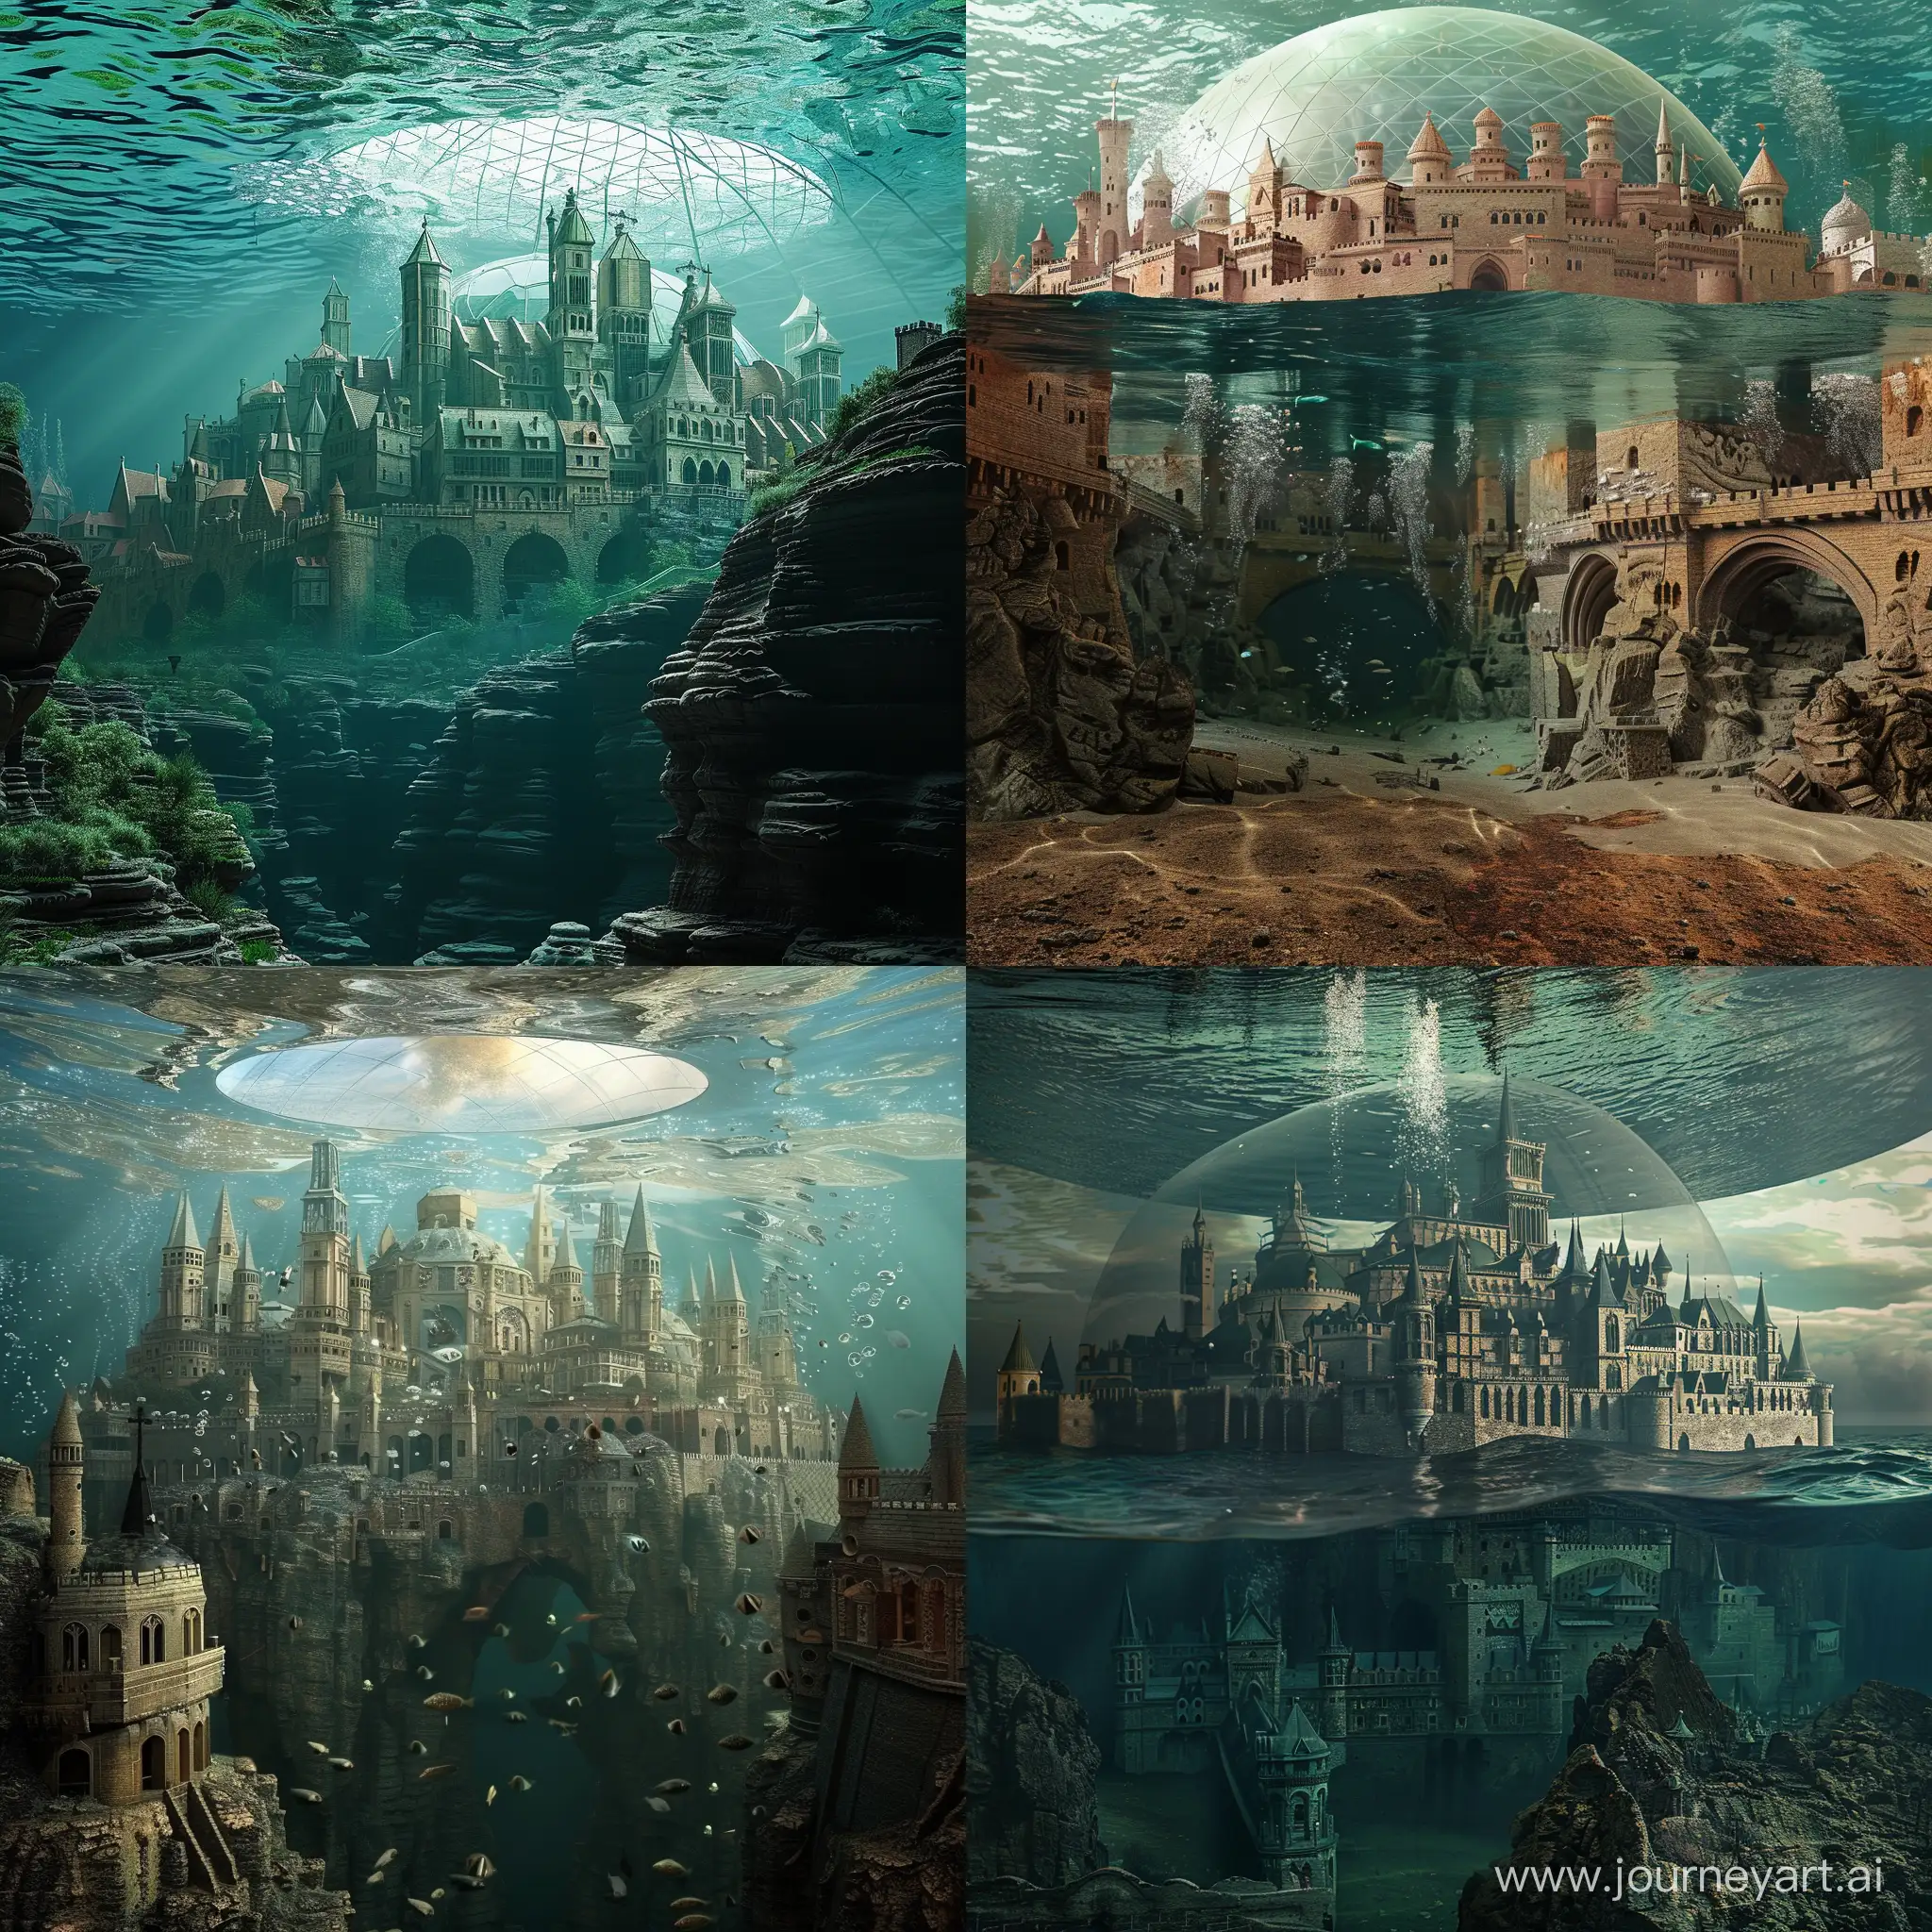 an underwater medieval city located under a dome
